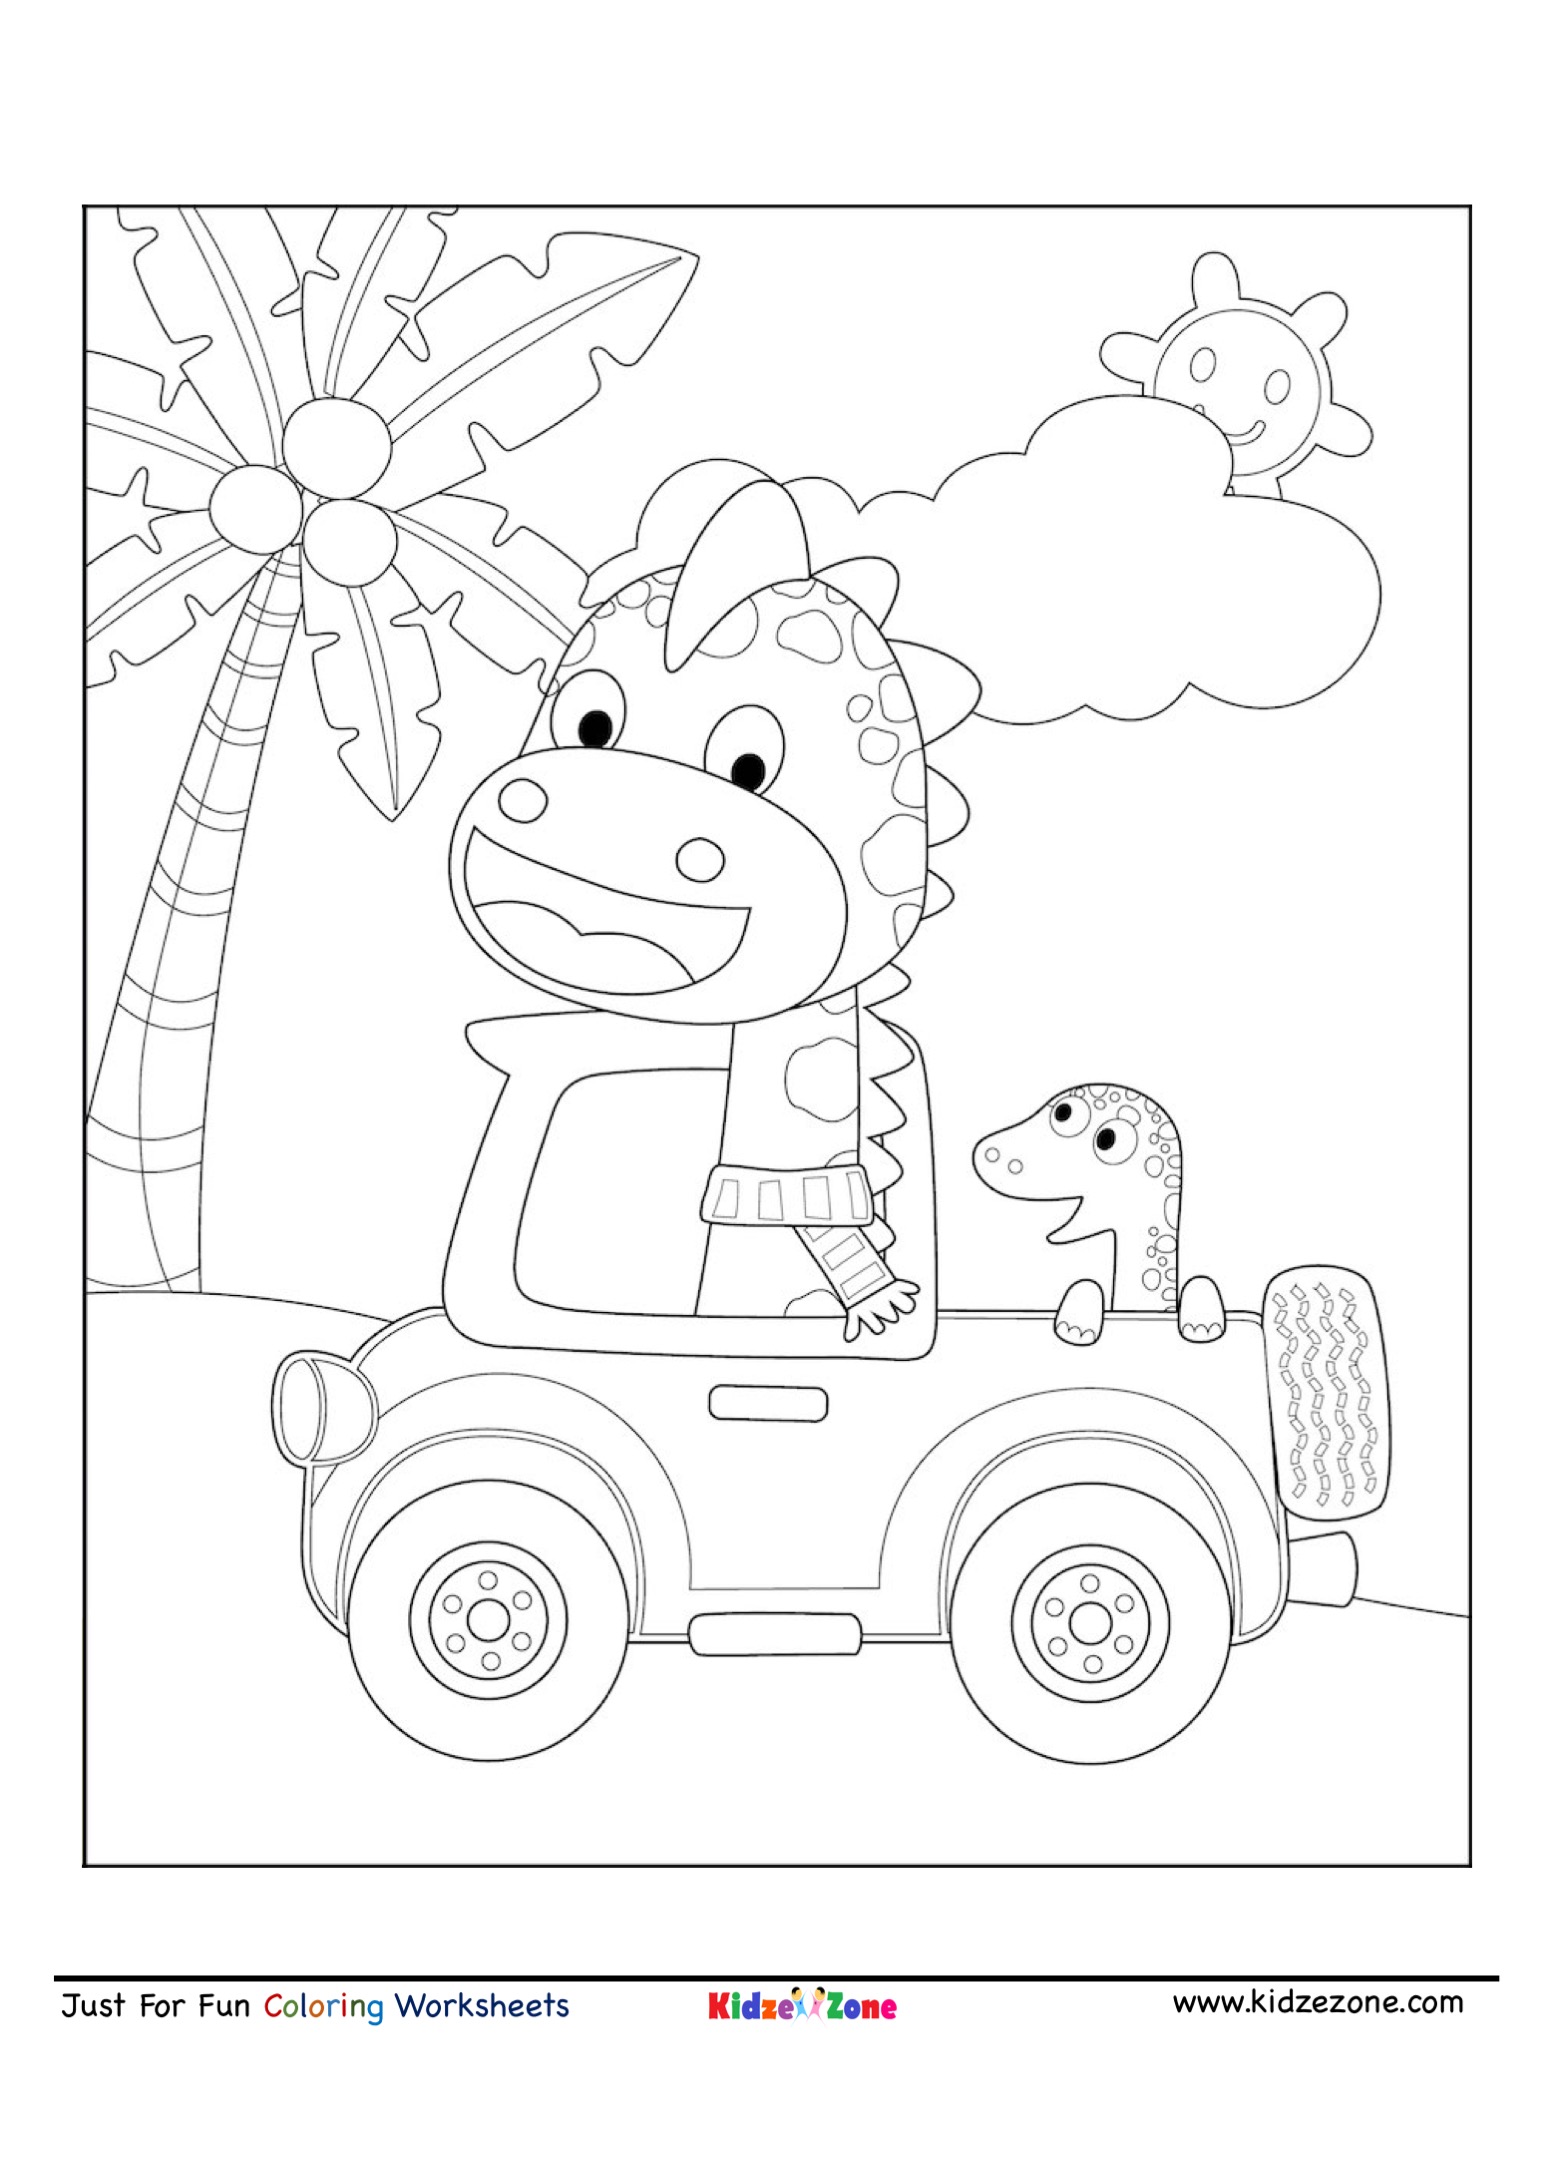 Giraffe and friends Driving coloring page - KidzeZone